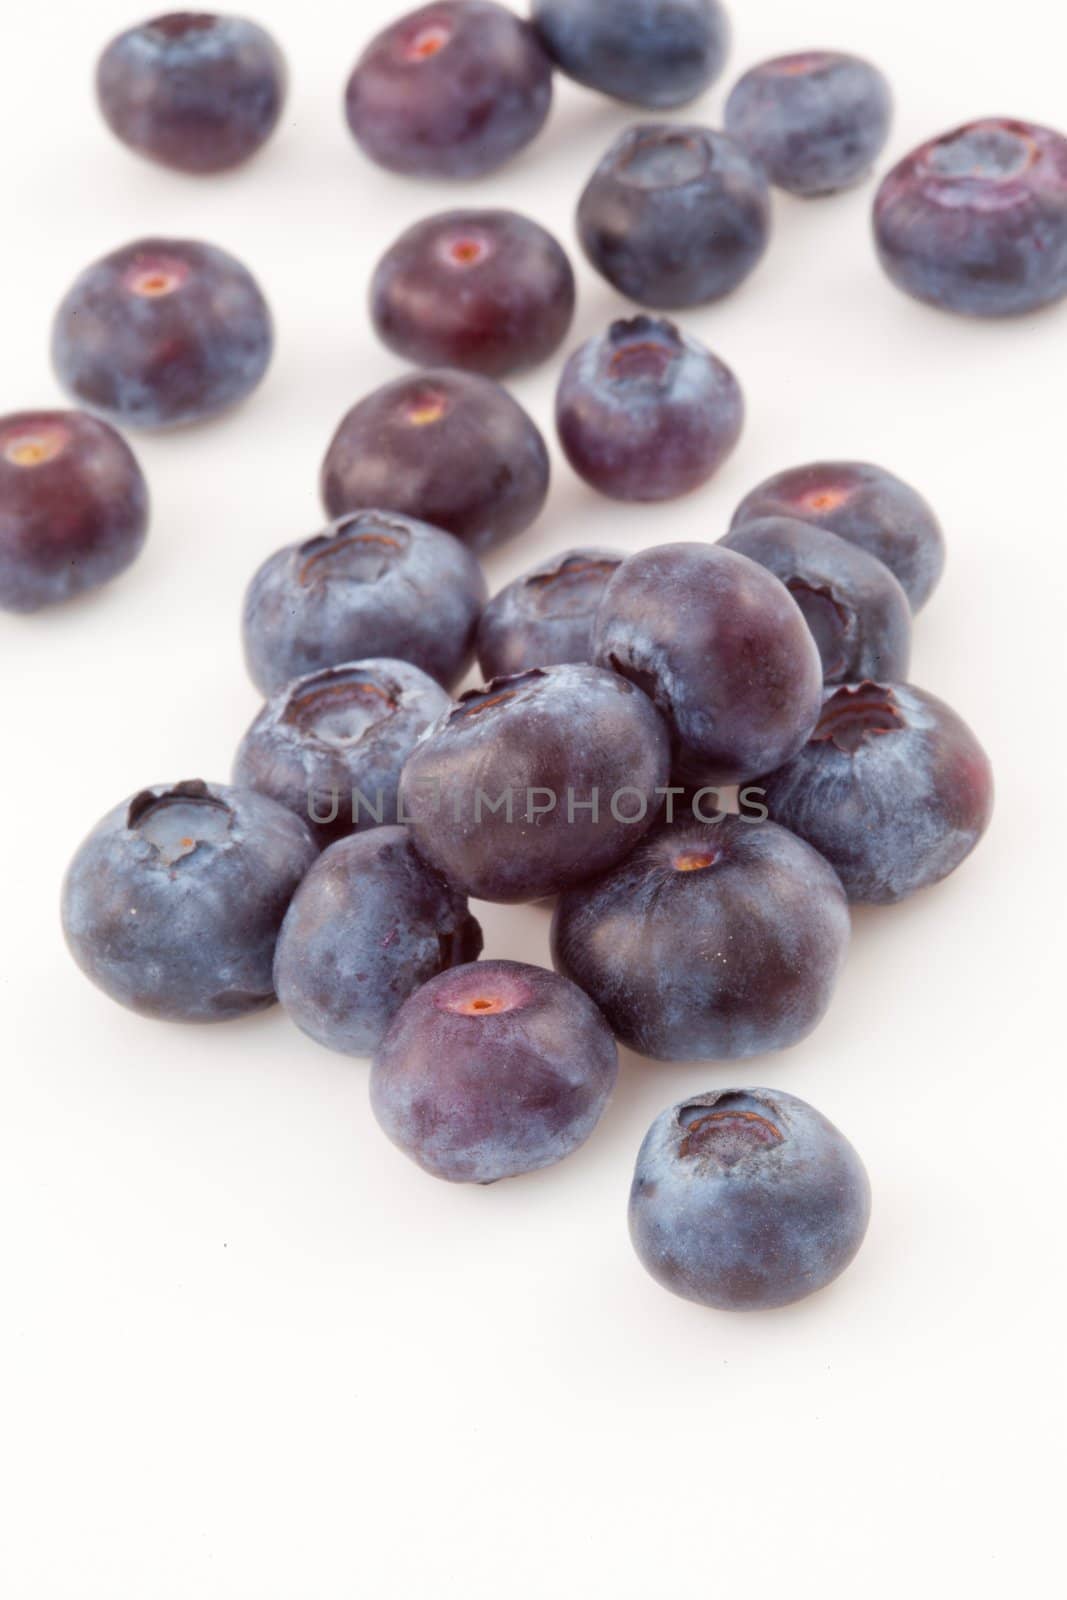 Blueberries against a white background